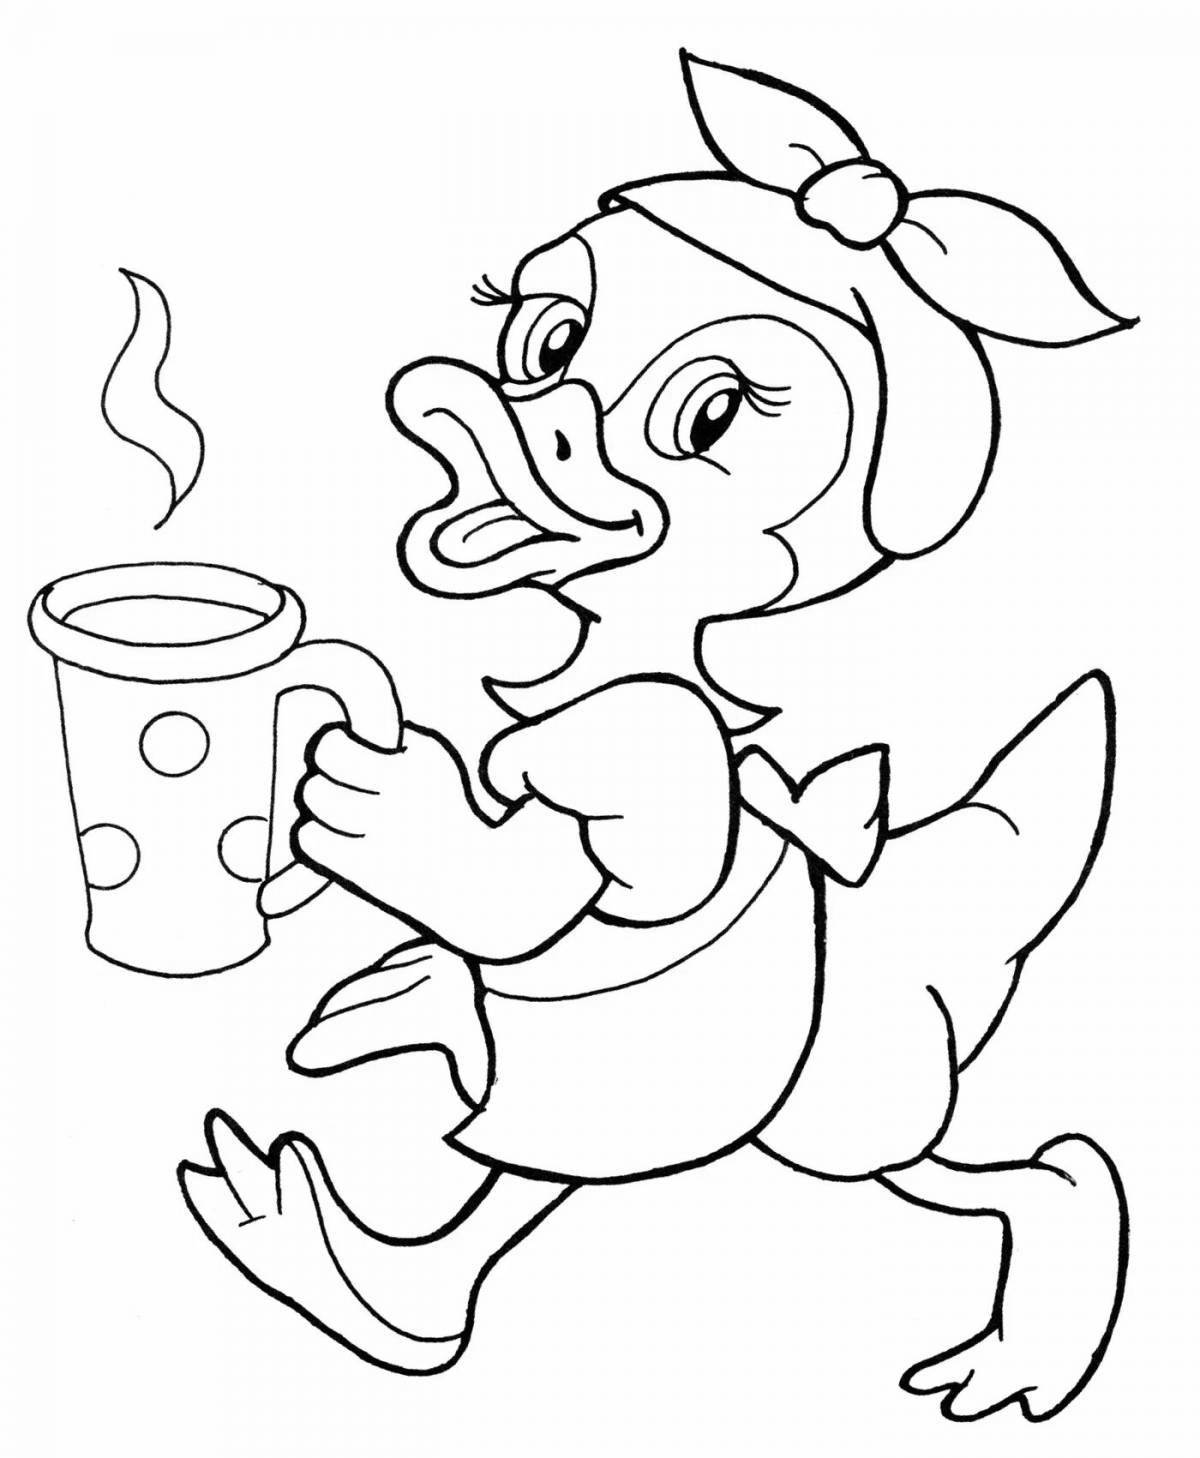 Coloring book tropical drink for girls